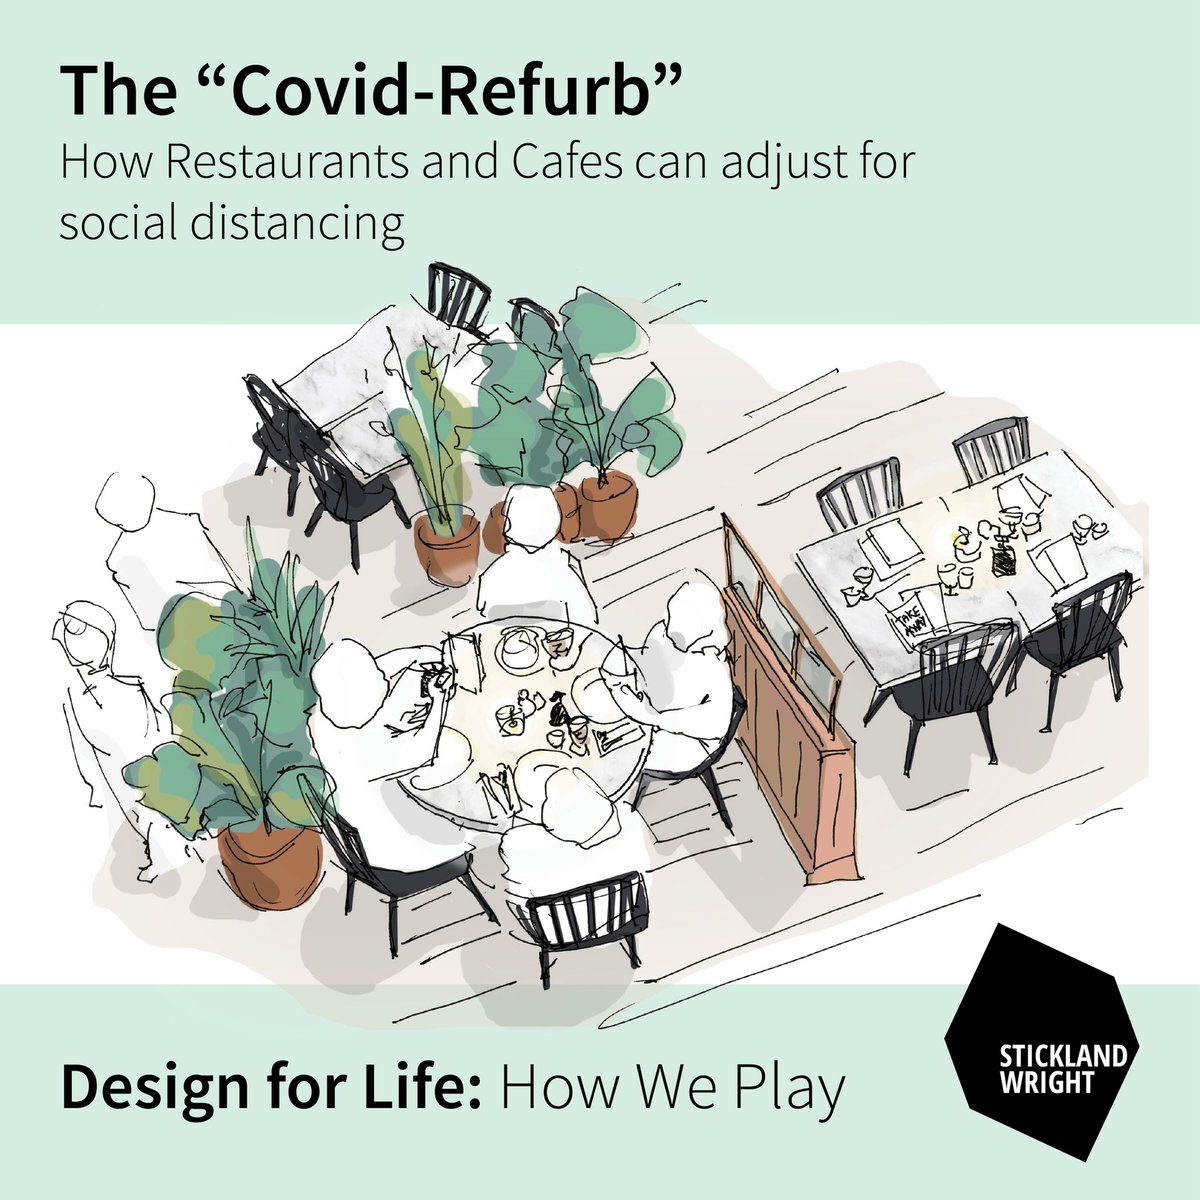 We have released the first of our blog series on Design for Life : How We Play. sticklandwright.co.uk/news #restaurants #socialdistancing #restaurantdesign #cacedesign #brighton #backtowork